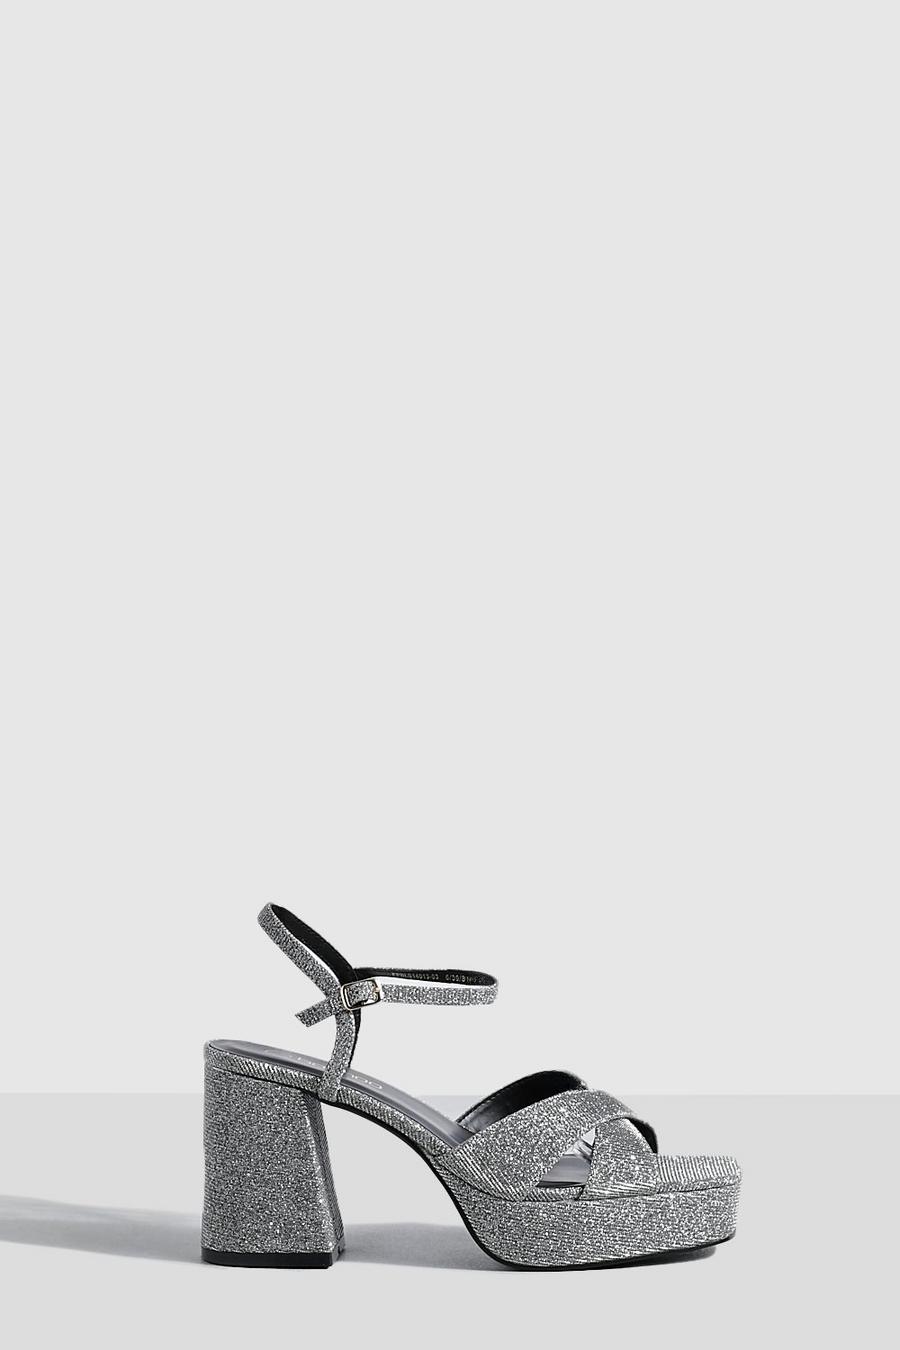 Silver Wide Width Metallic Crossover Mid Height Platforms